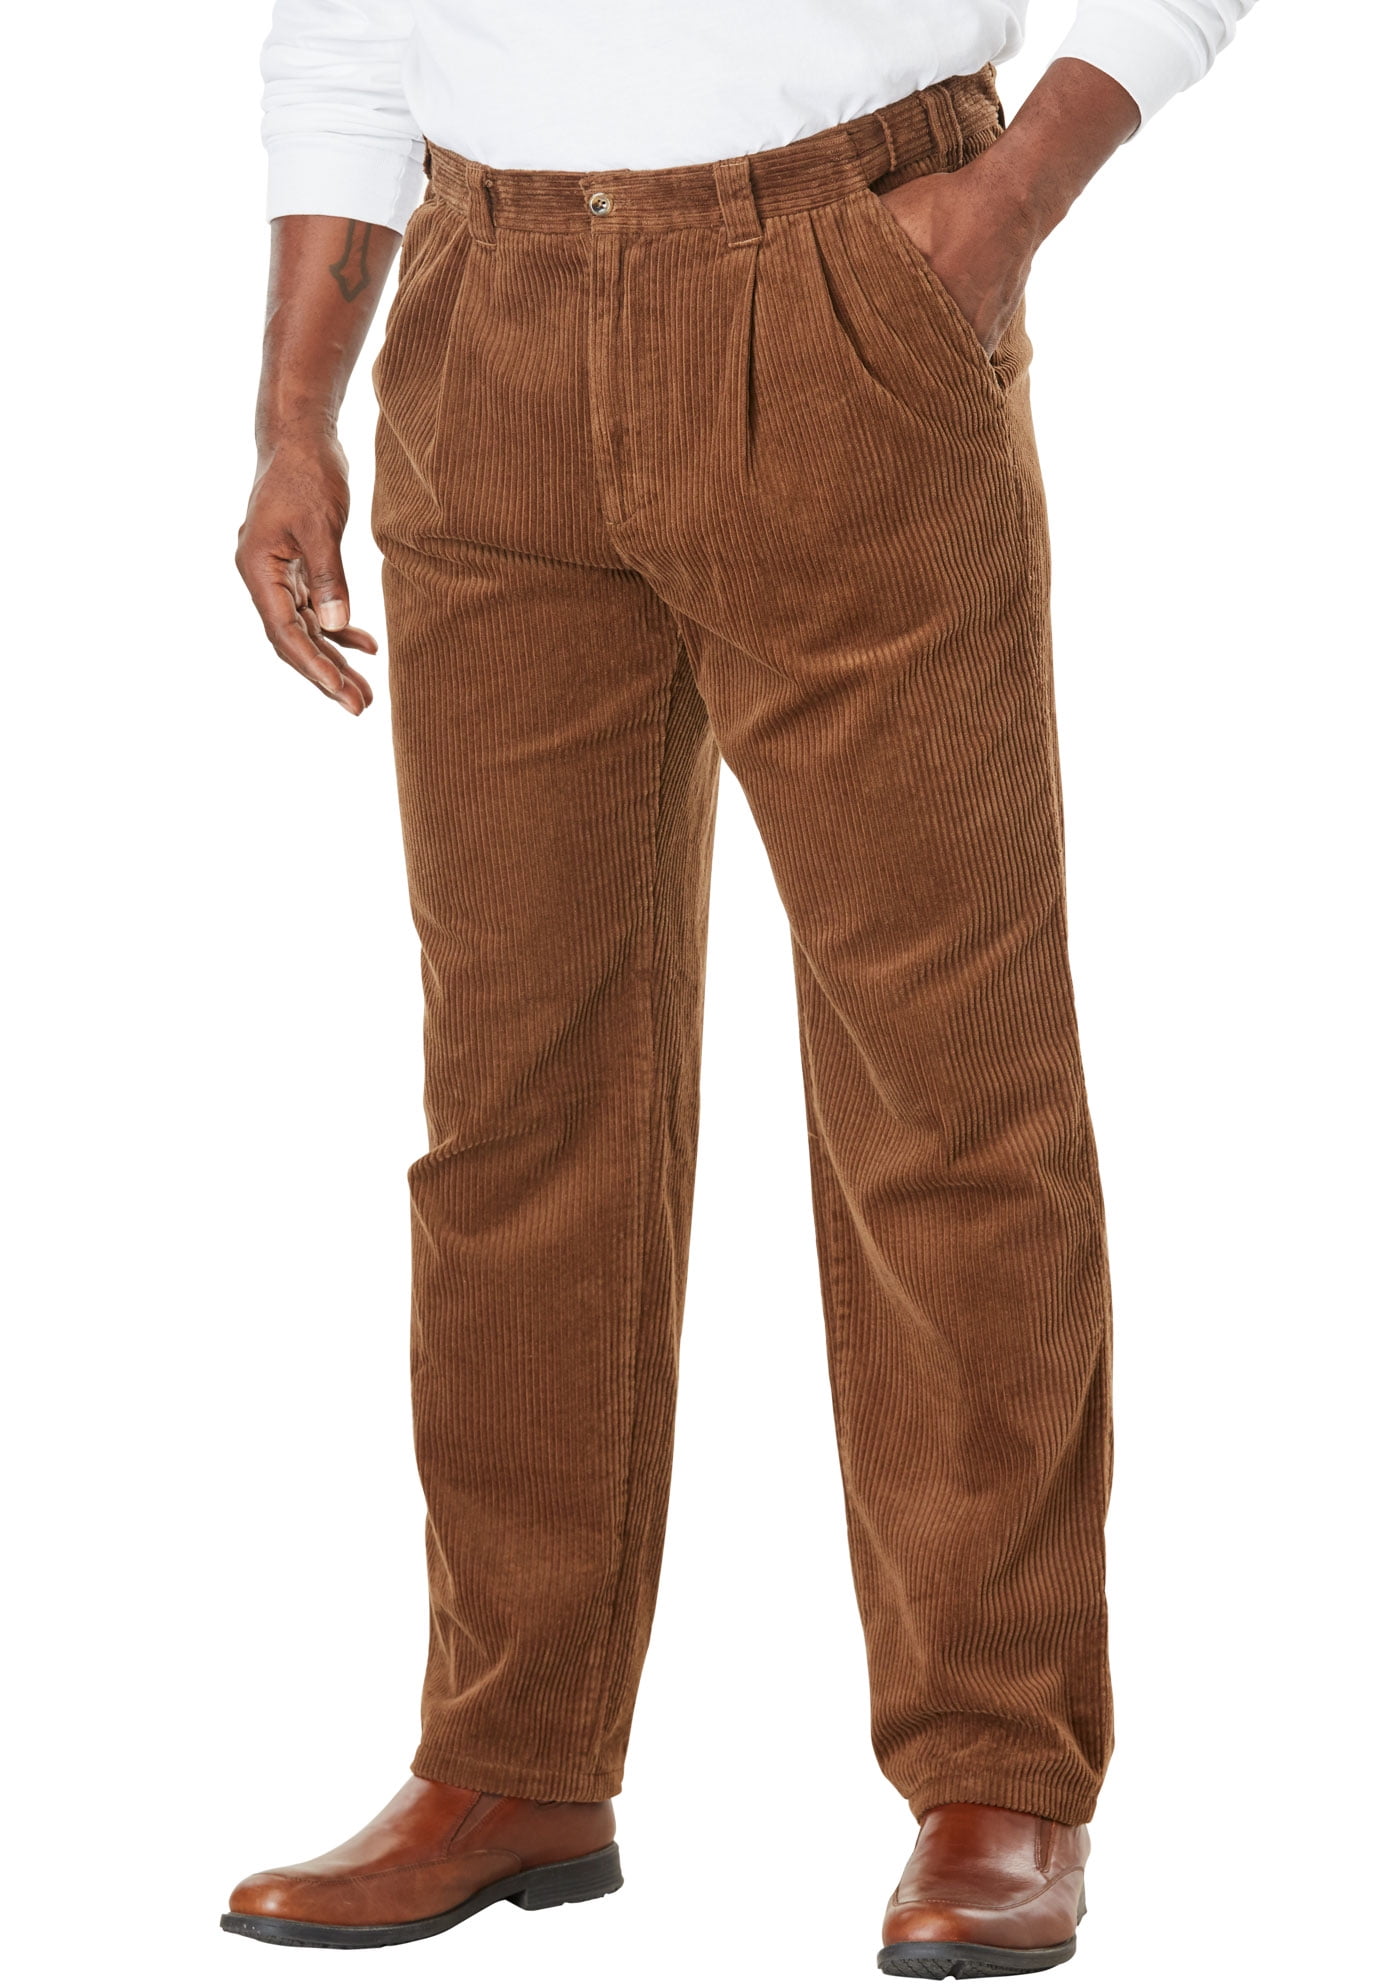 The Tall Perfect Vintage Flare Pant Corduroy Edition